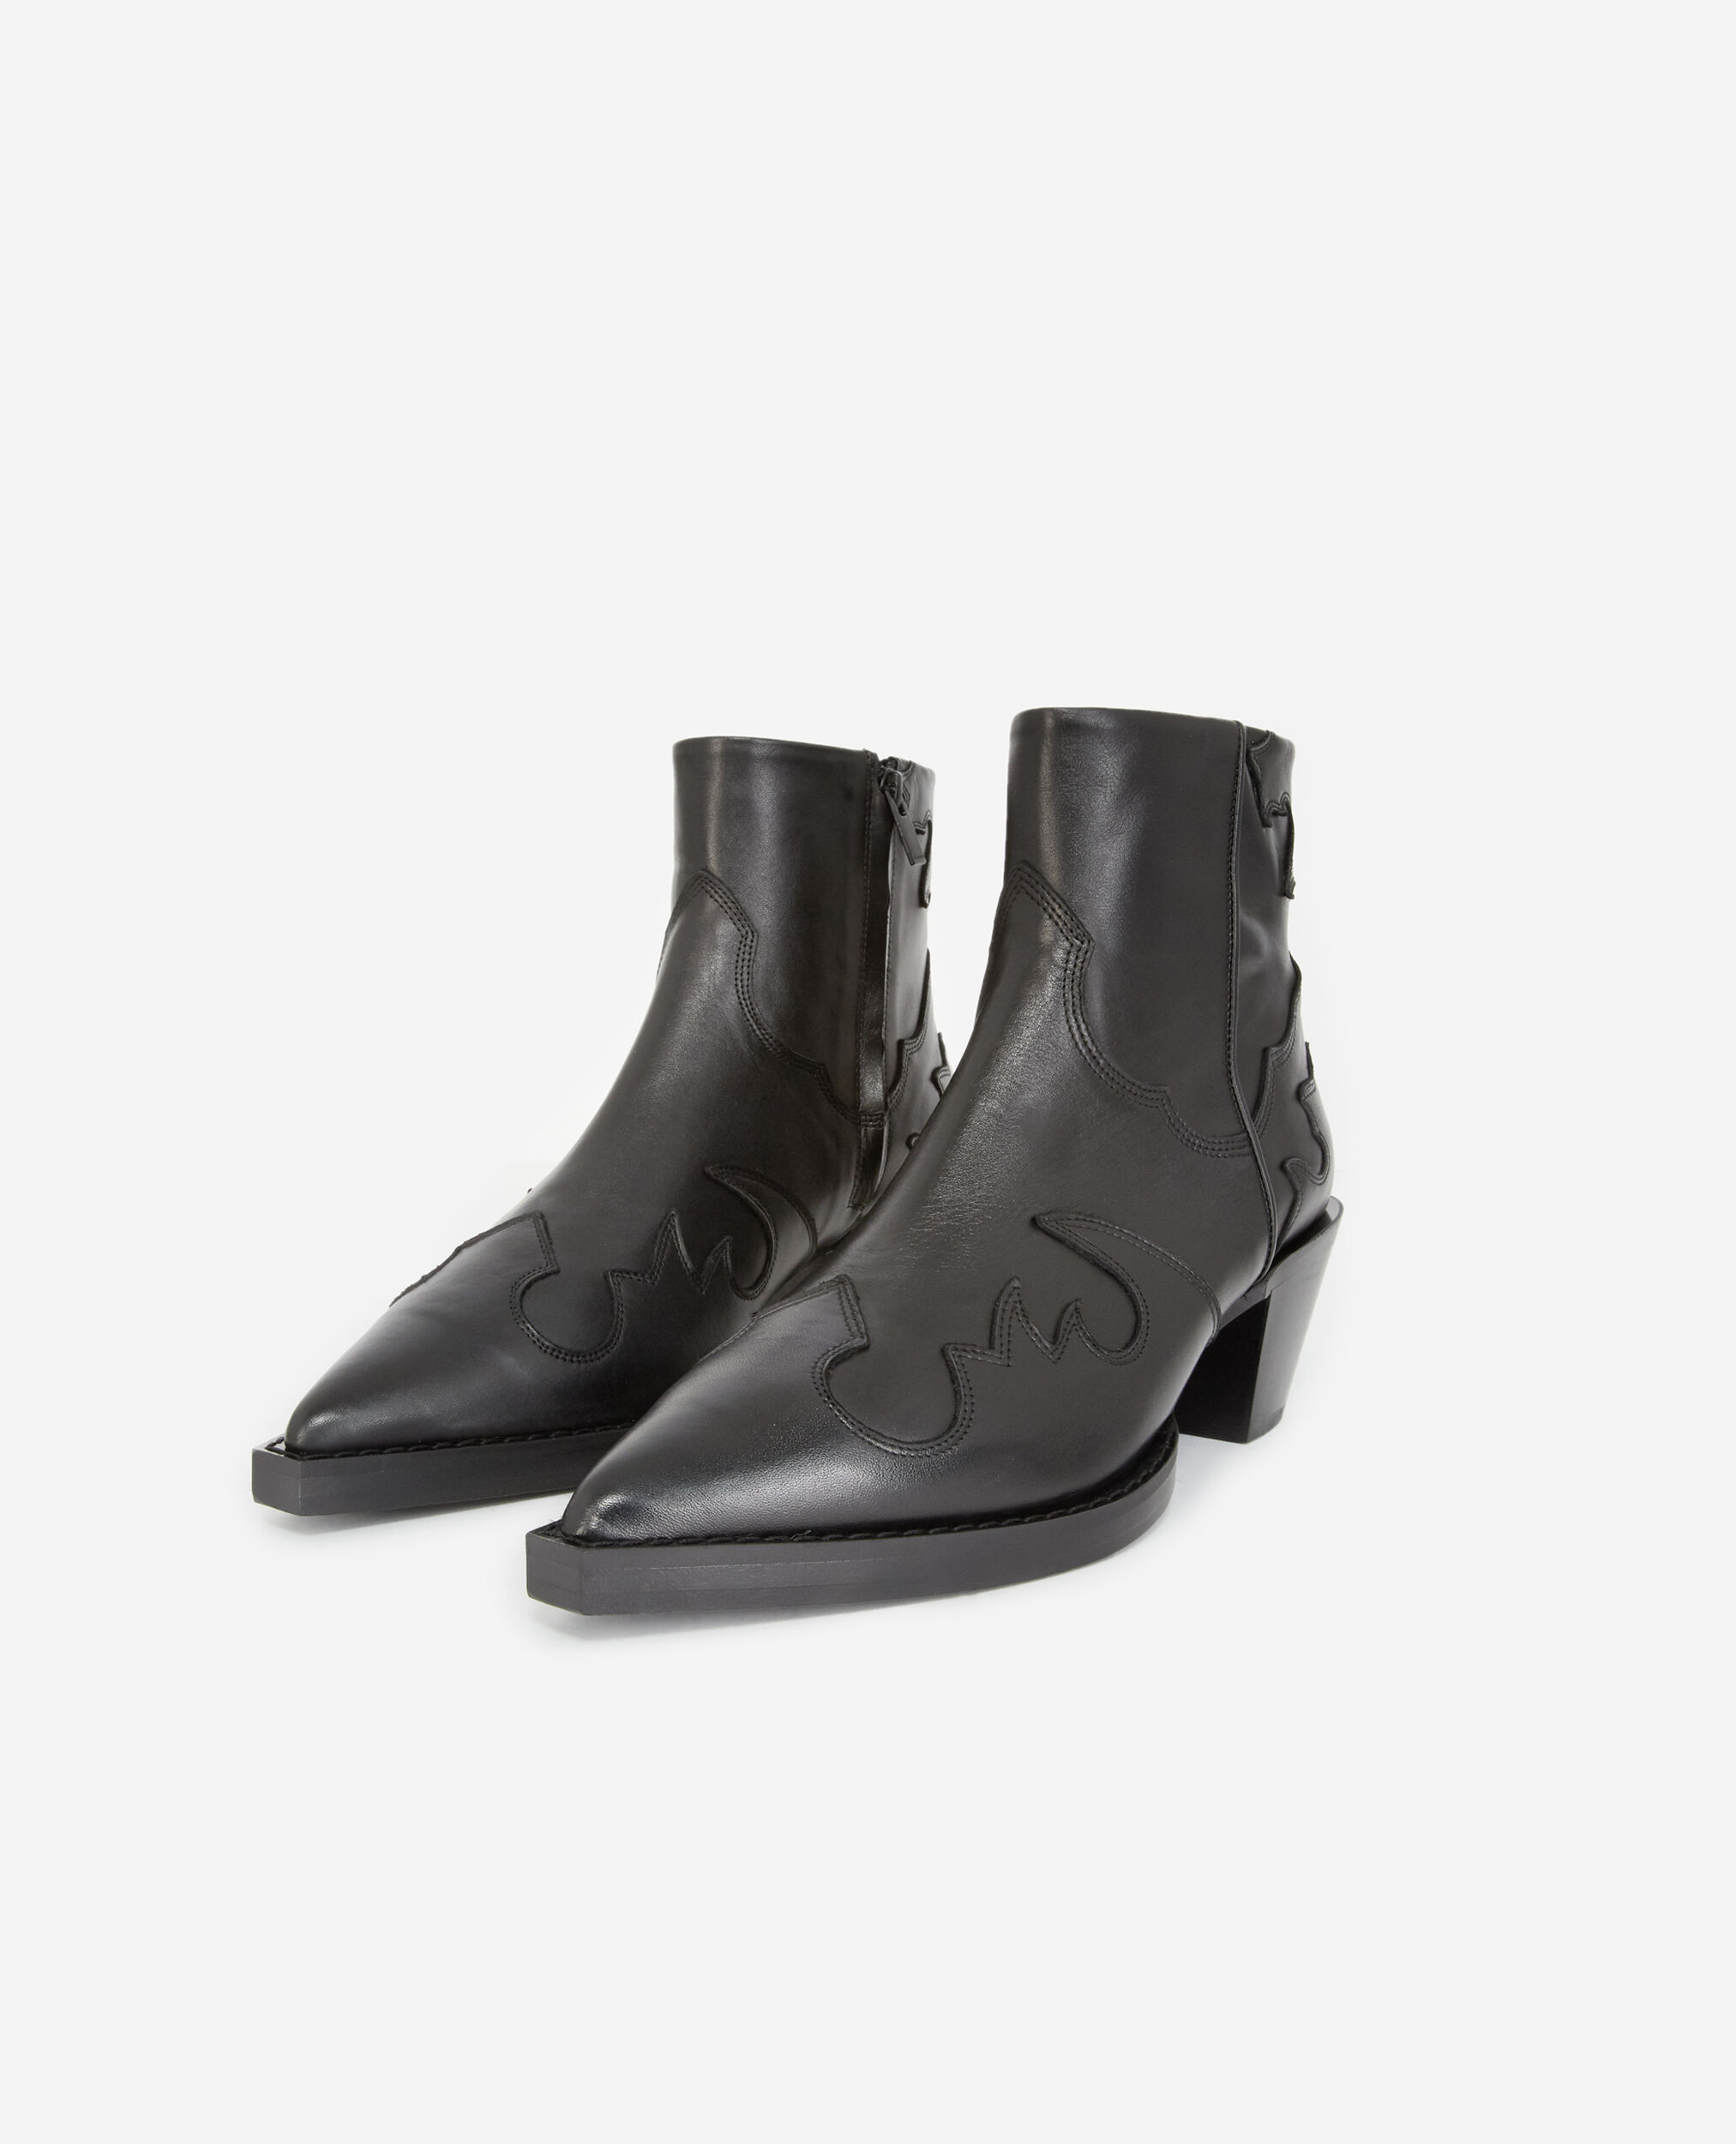 Heeled western black leather ankle boots | The Kooples - US